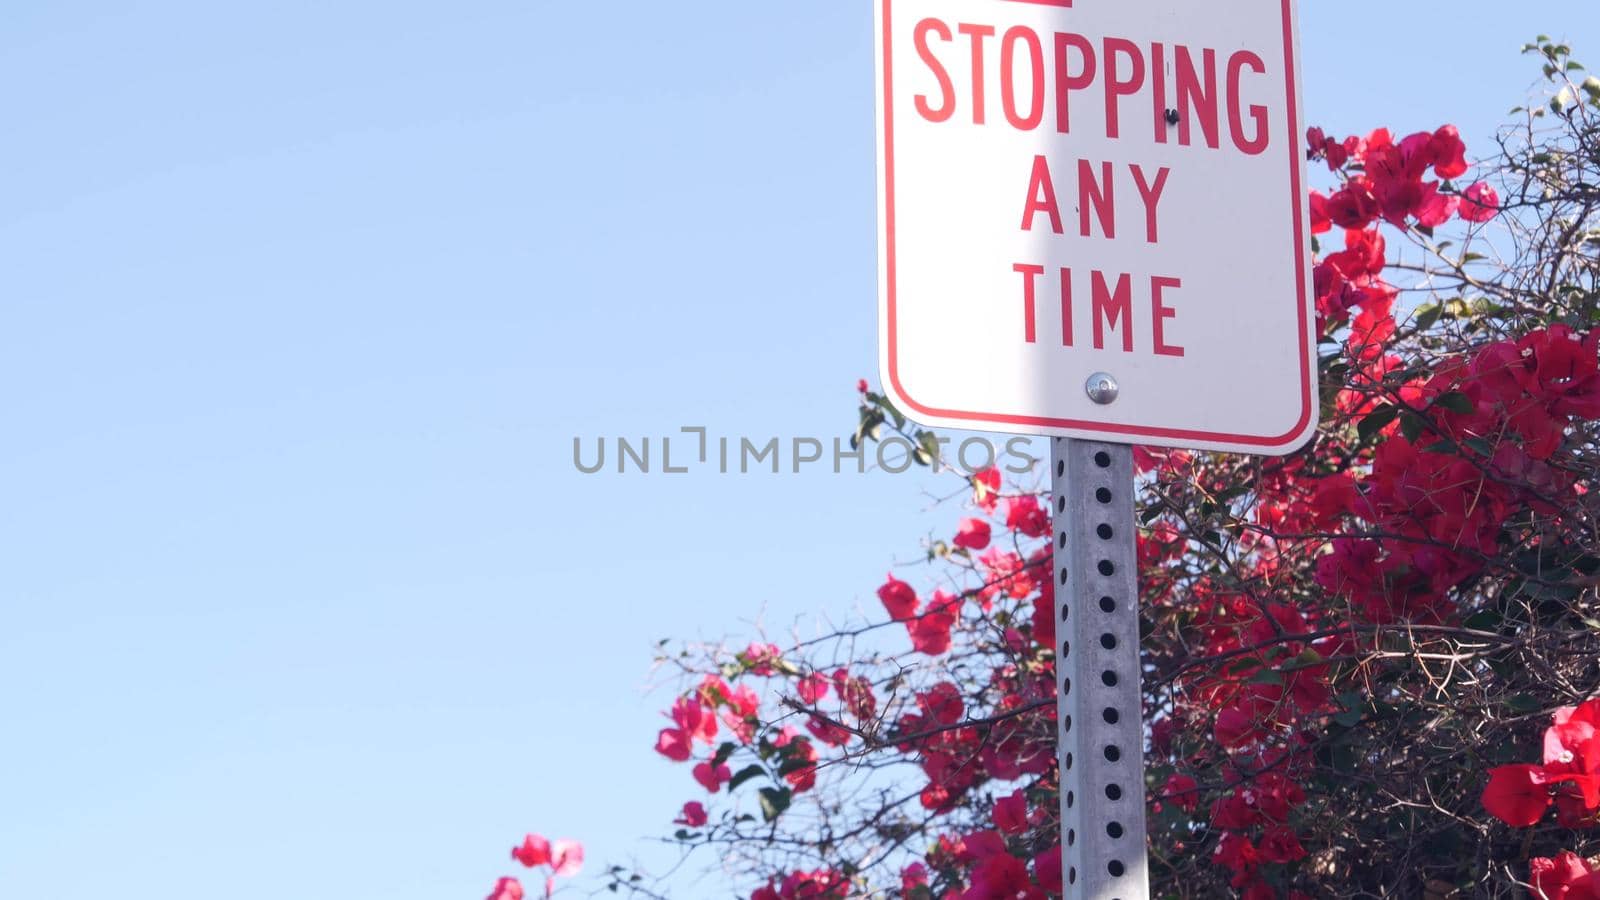 No stopping any time road sign, California city street, USA. Bougainvillea bloom by DogoraSun